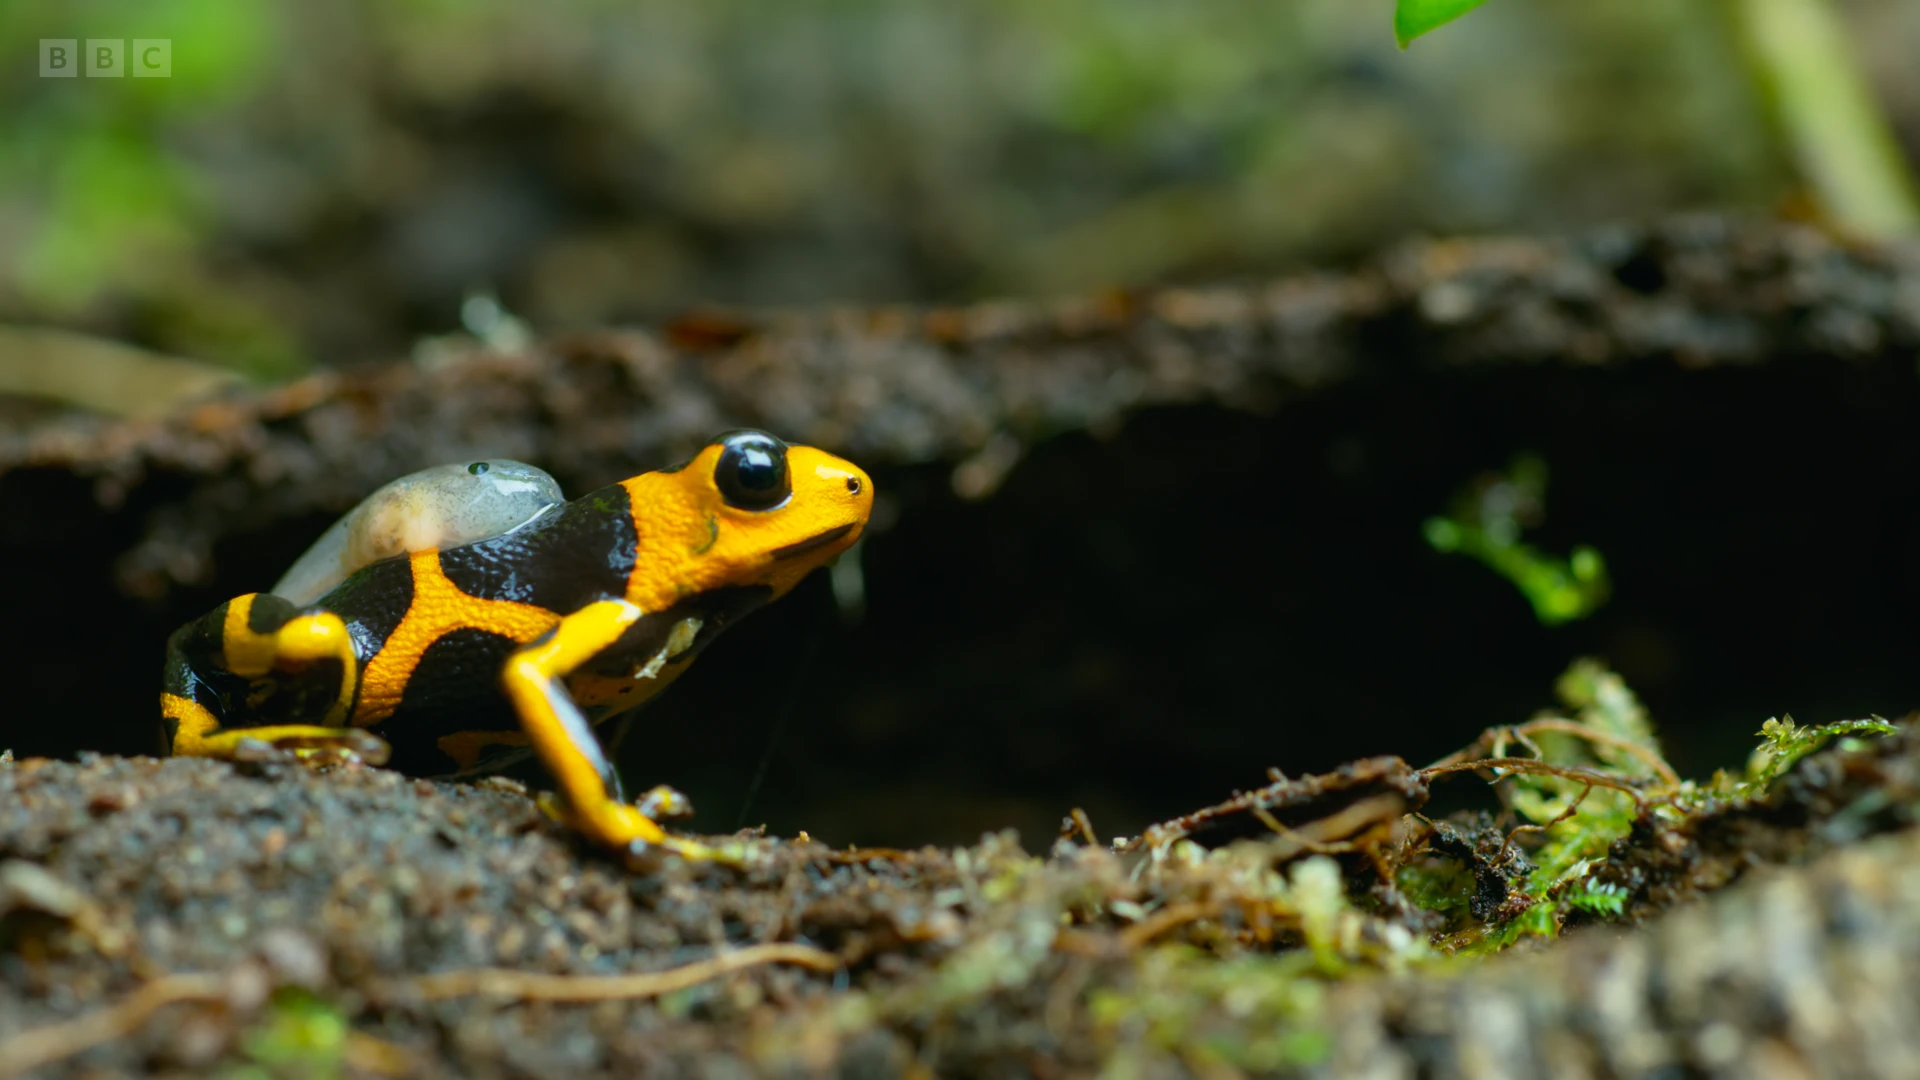 Mimic poison frog (Ranitomeya imitator) as shown in Seven Worlds, One Planet - South America